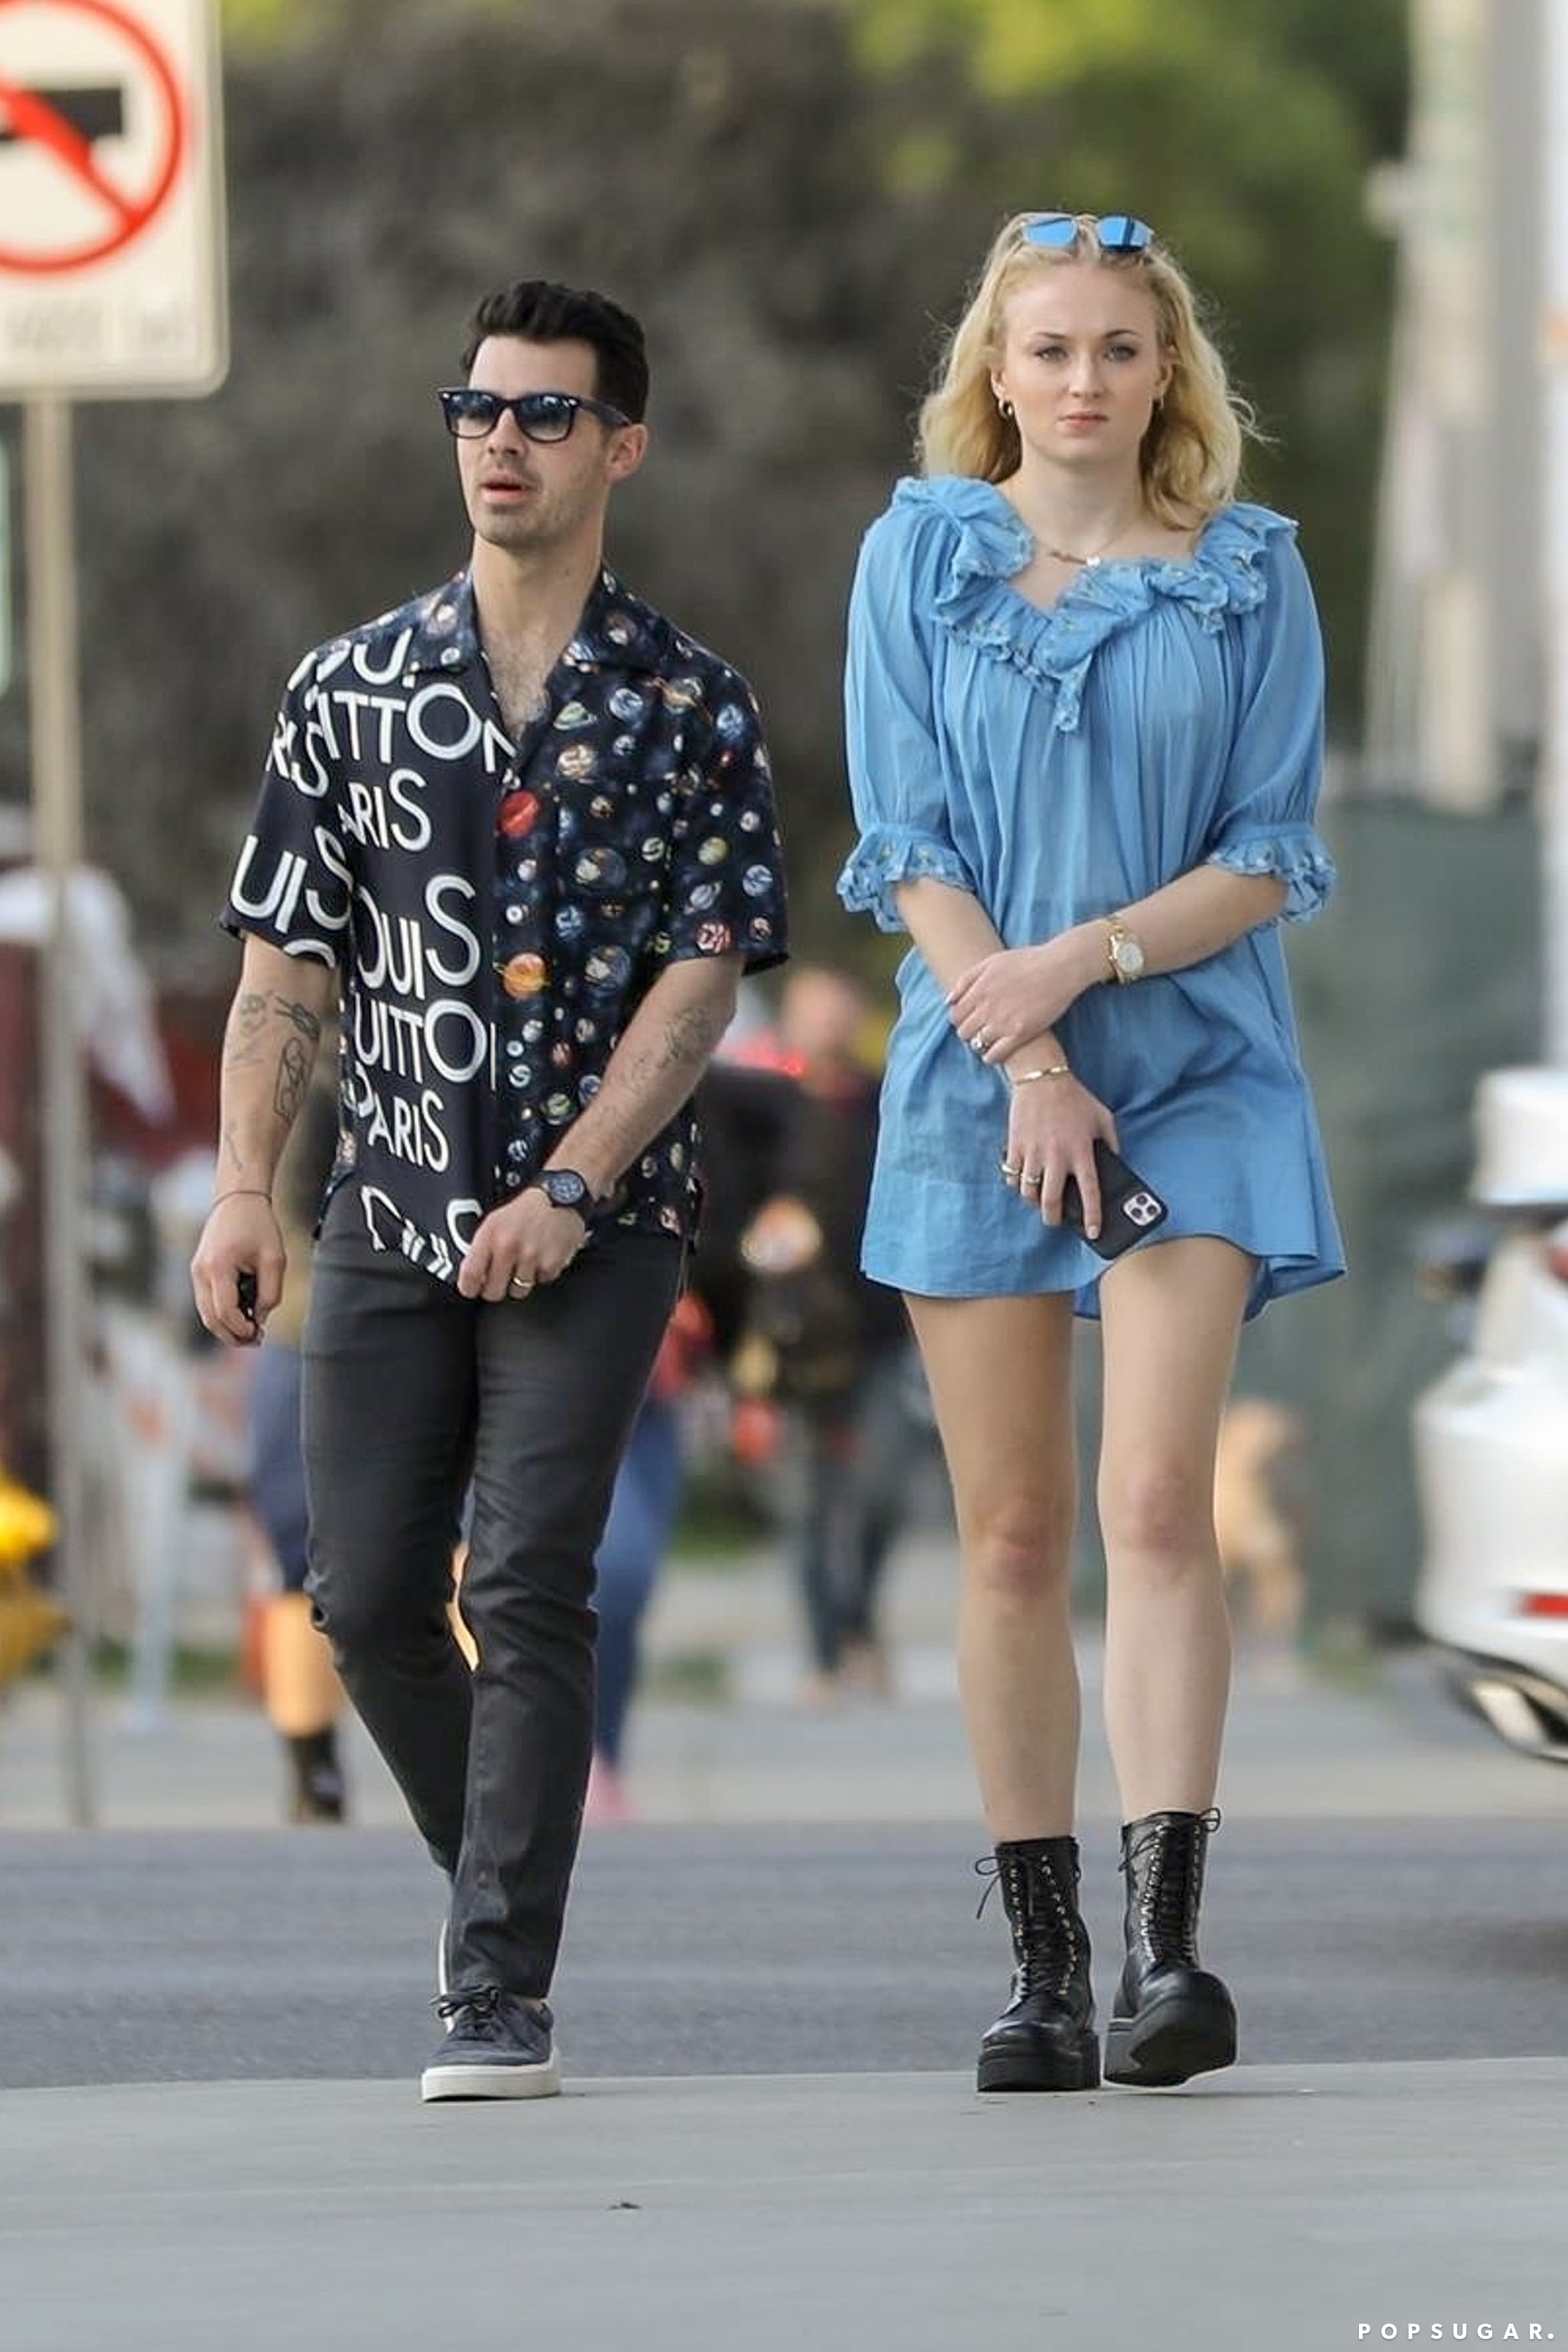 Joe Jonas Celebrates Birthday With Sophie Turner At Kith For Sneakers ...